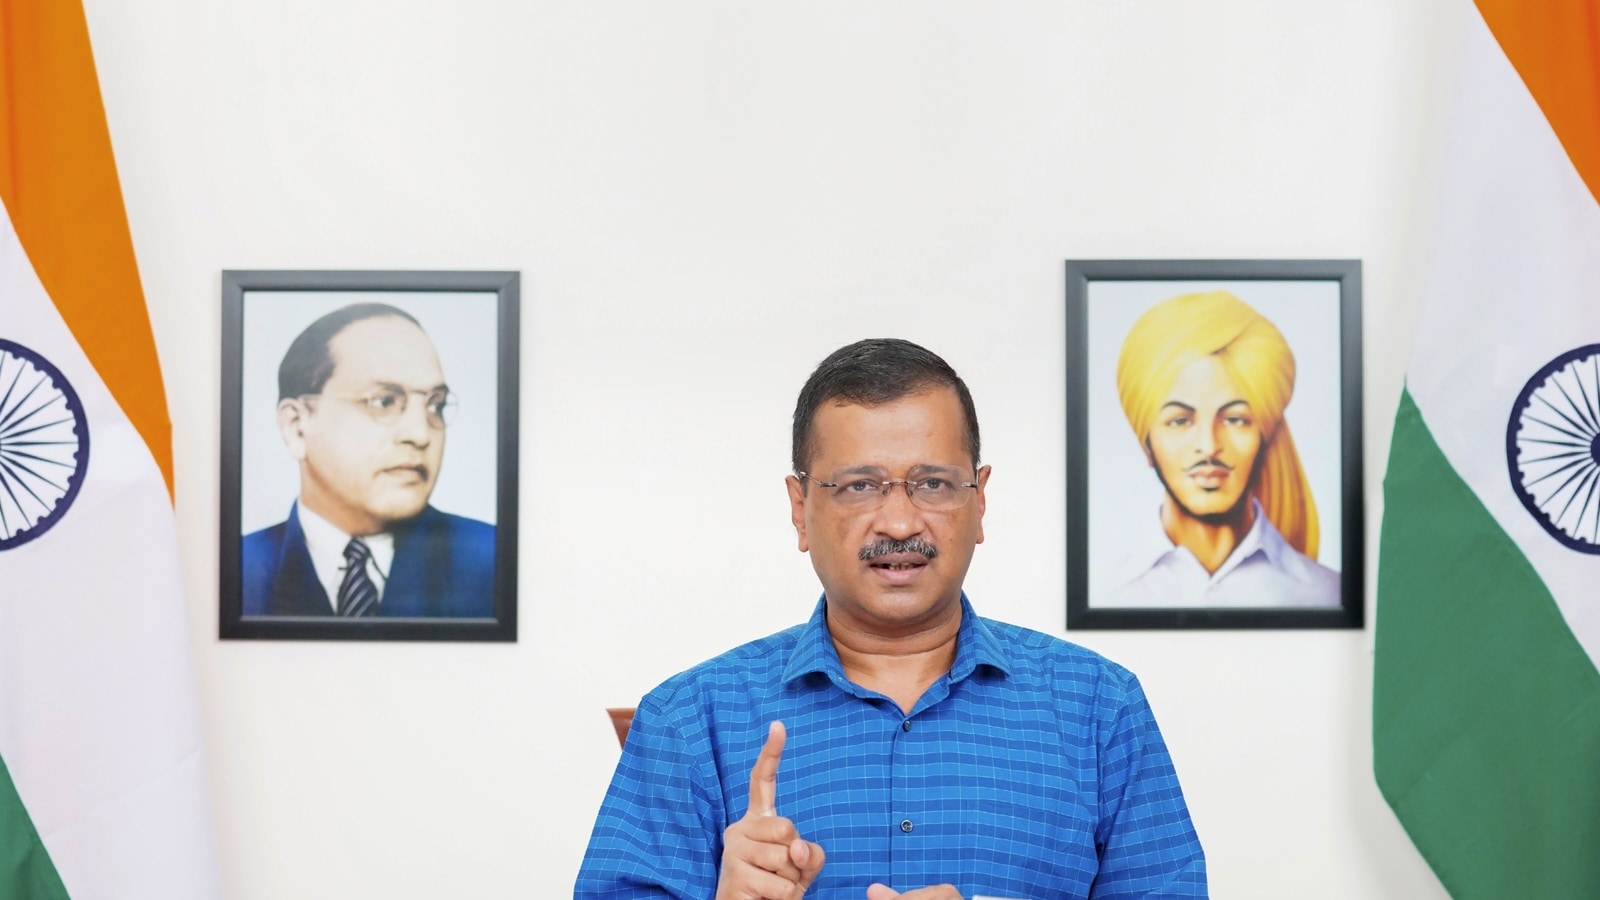 Omission of lesson on Bhagat Singh from K’taka school textbook shameful: AAP